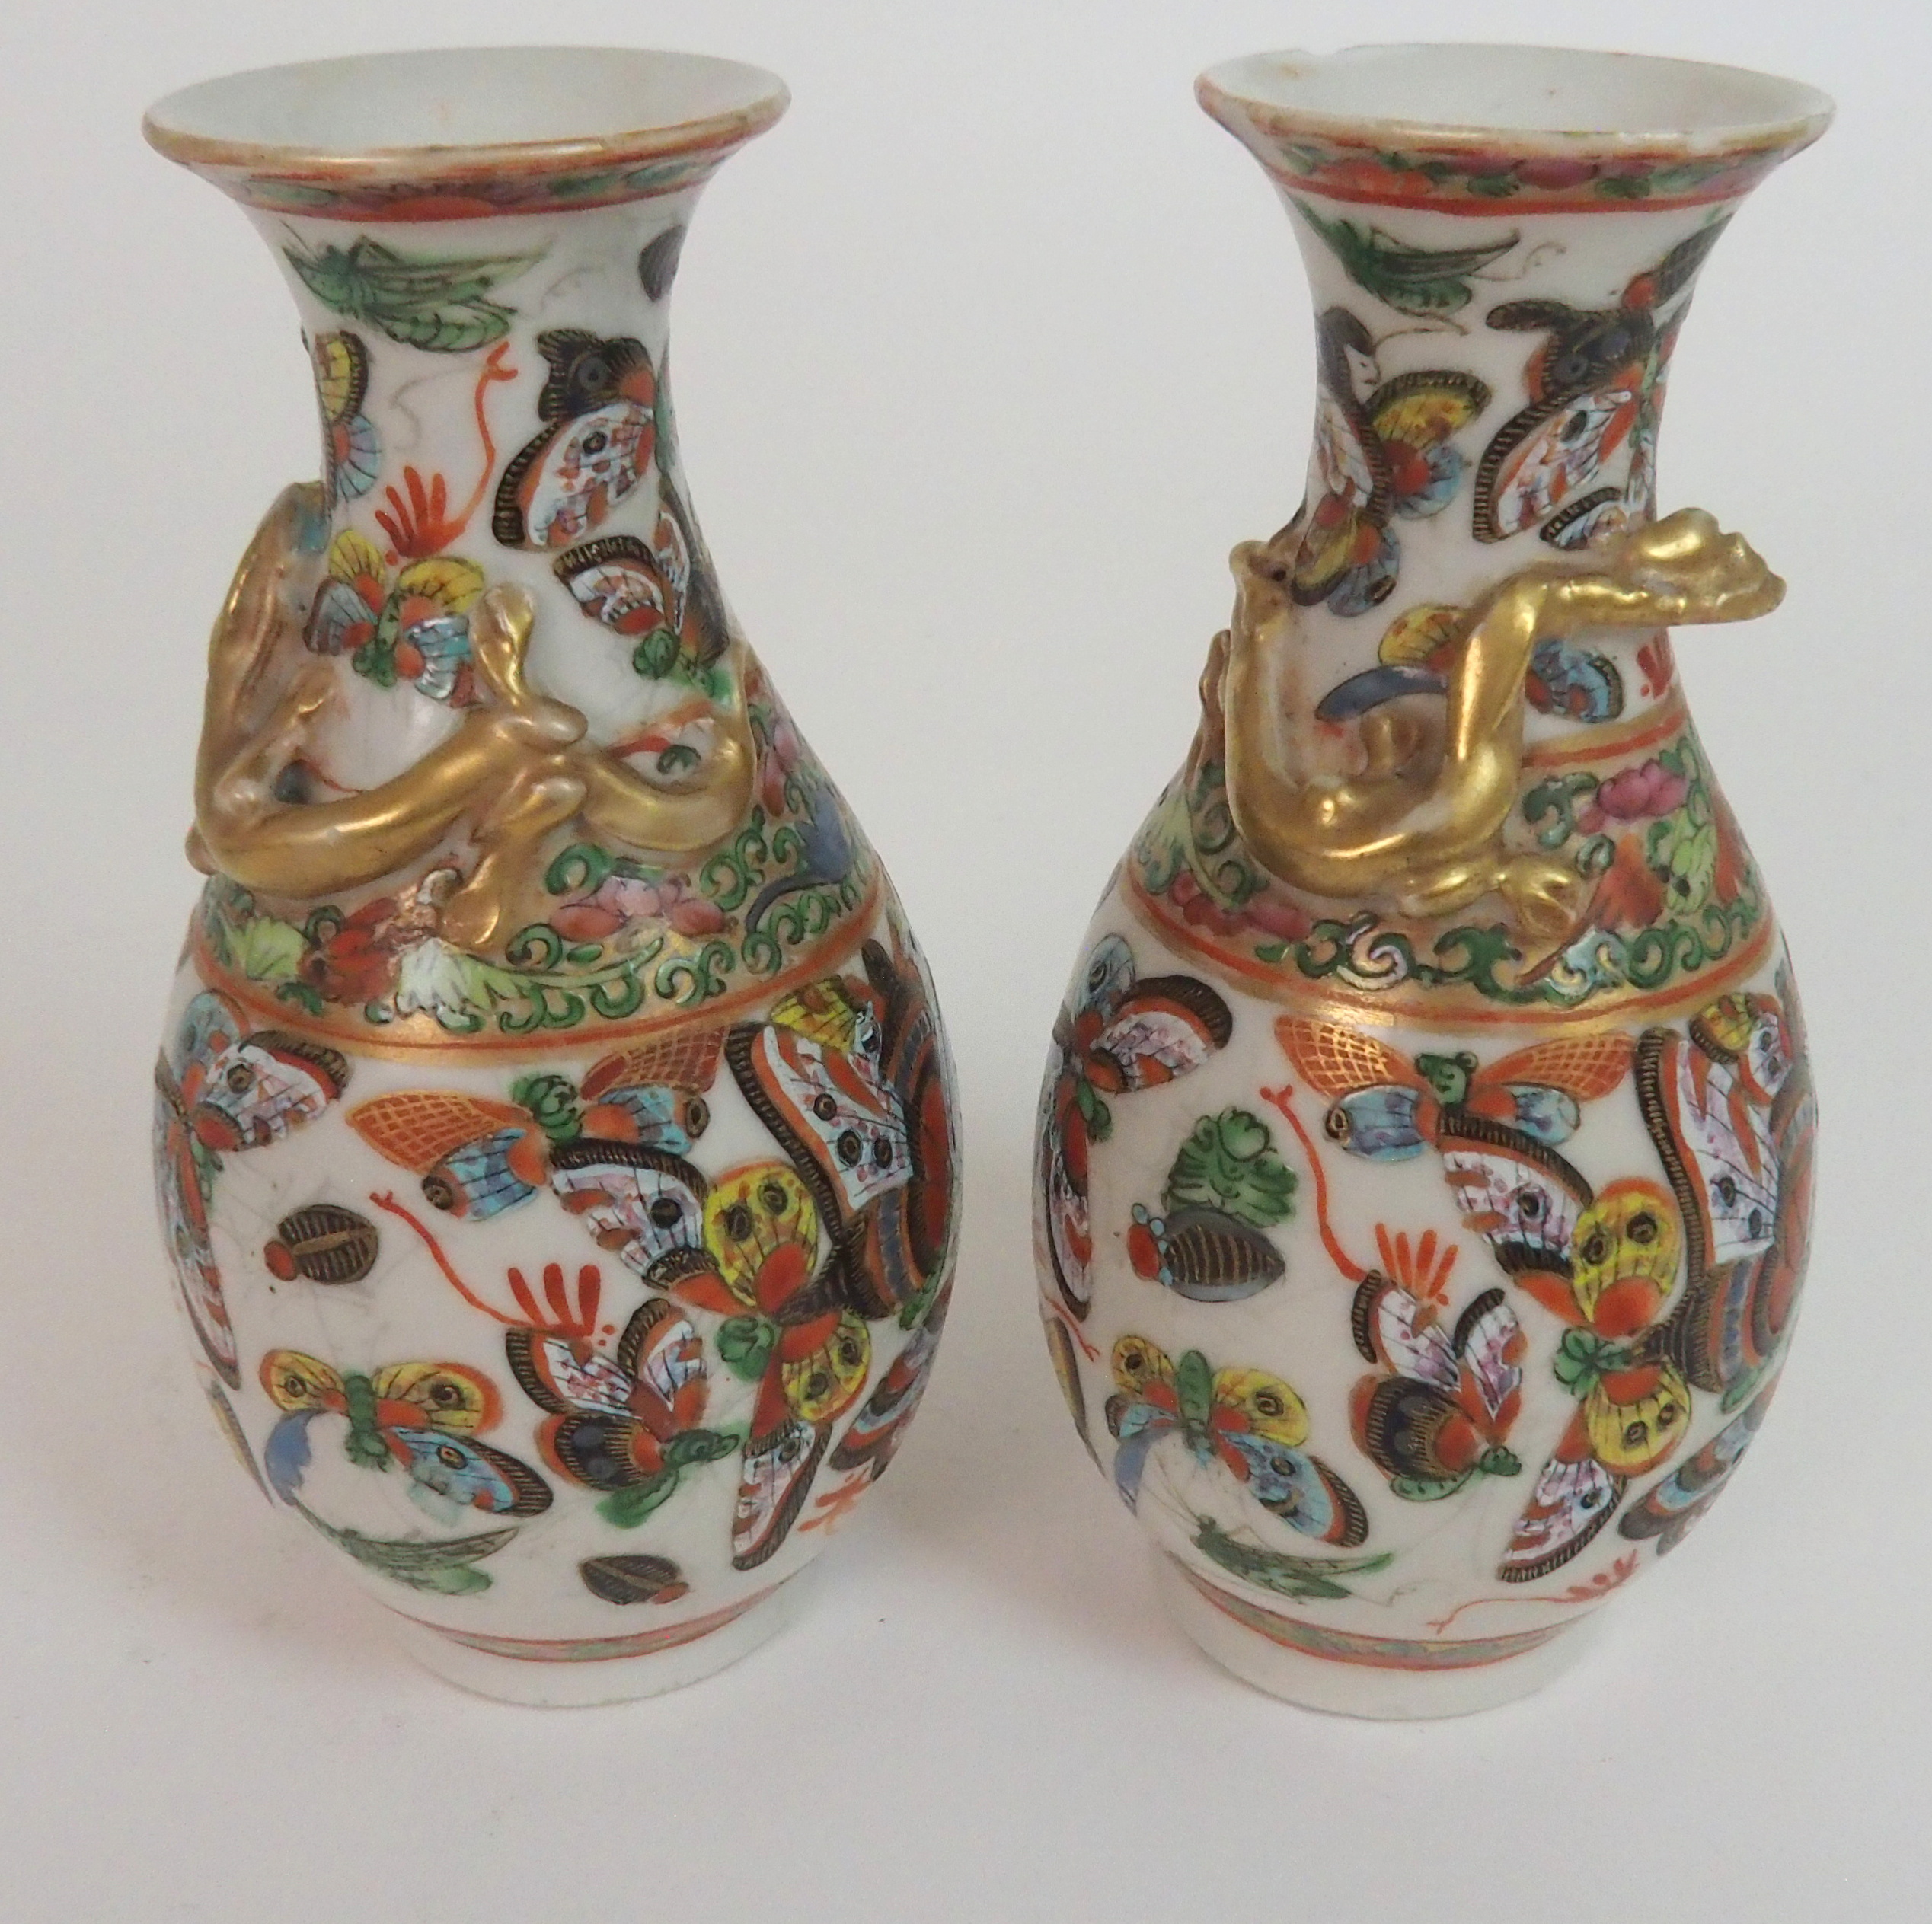 A PAIR OF CHINESE LILAC GROUND VASES paainted with butterflies, peonies and scrolling foliage, - Image 9 of 11